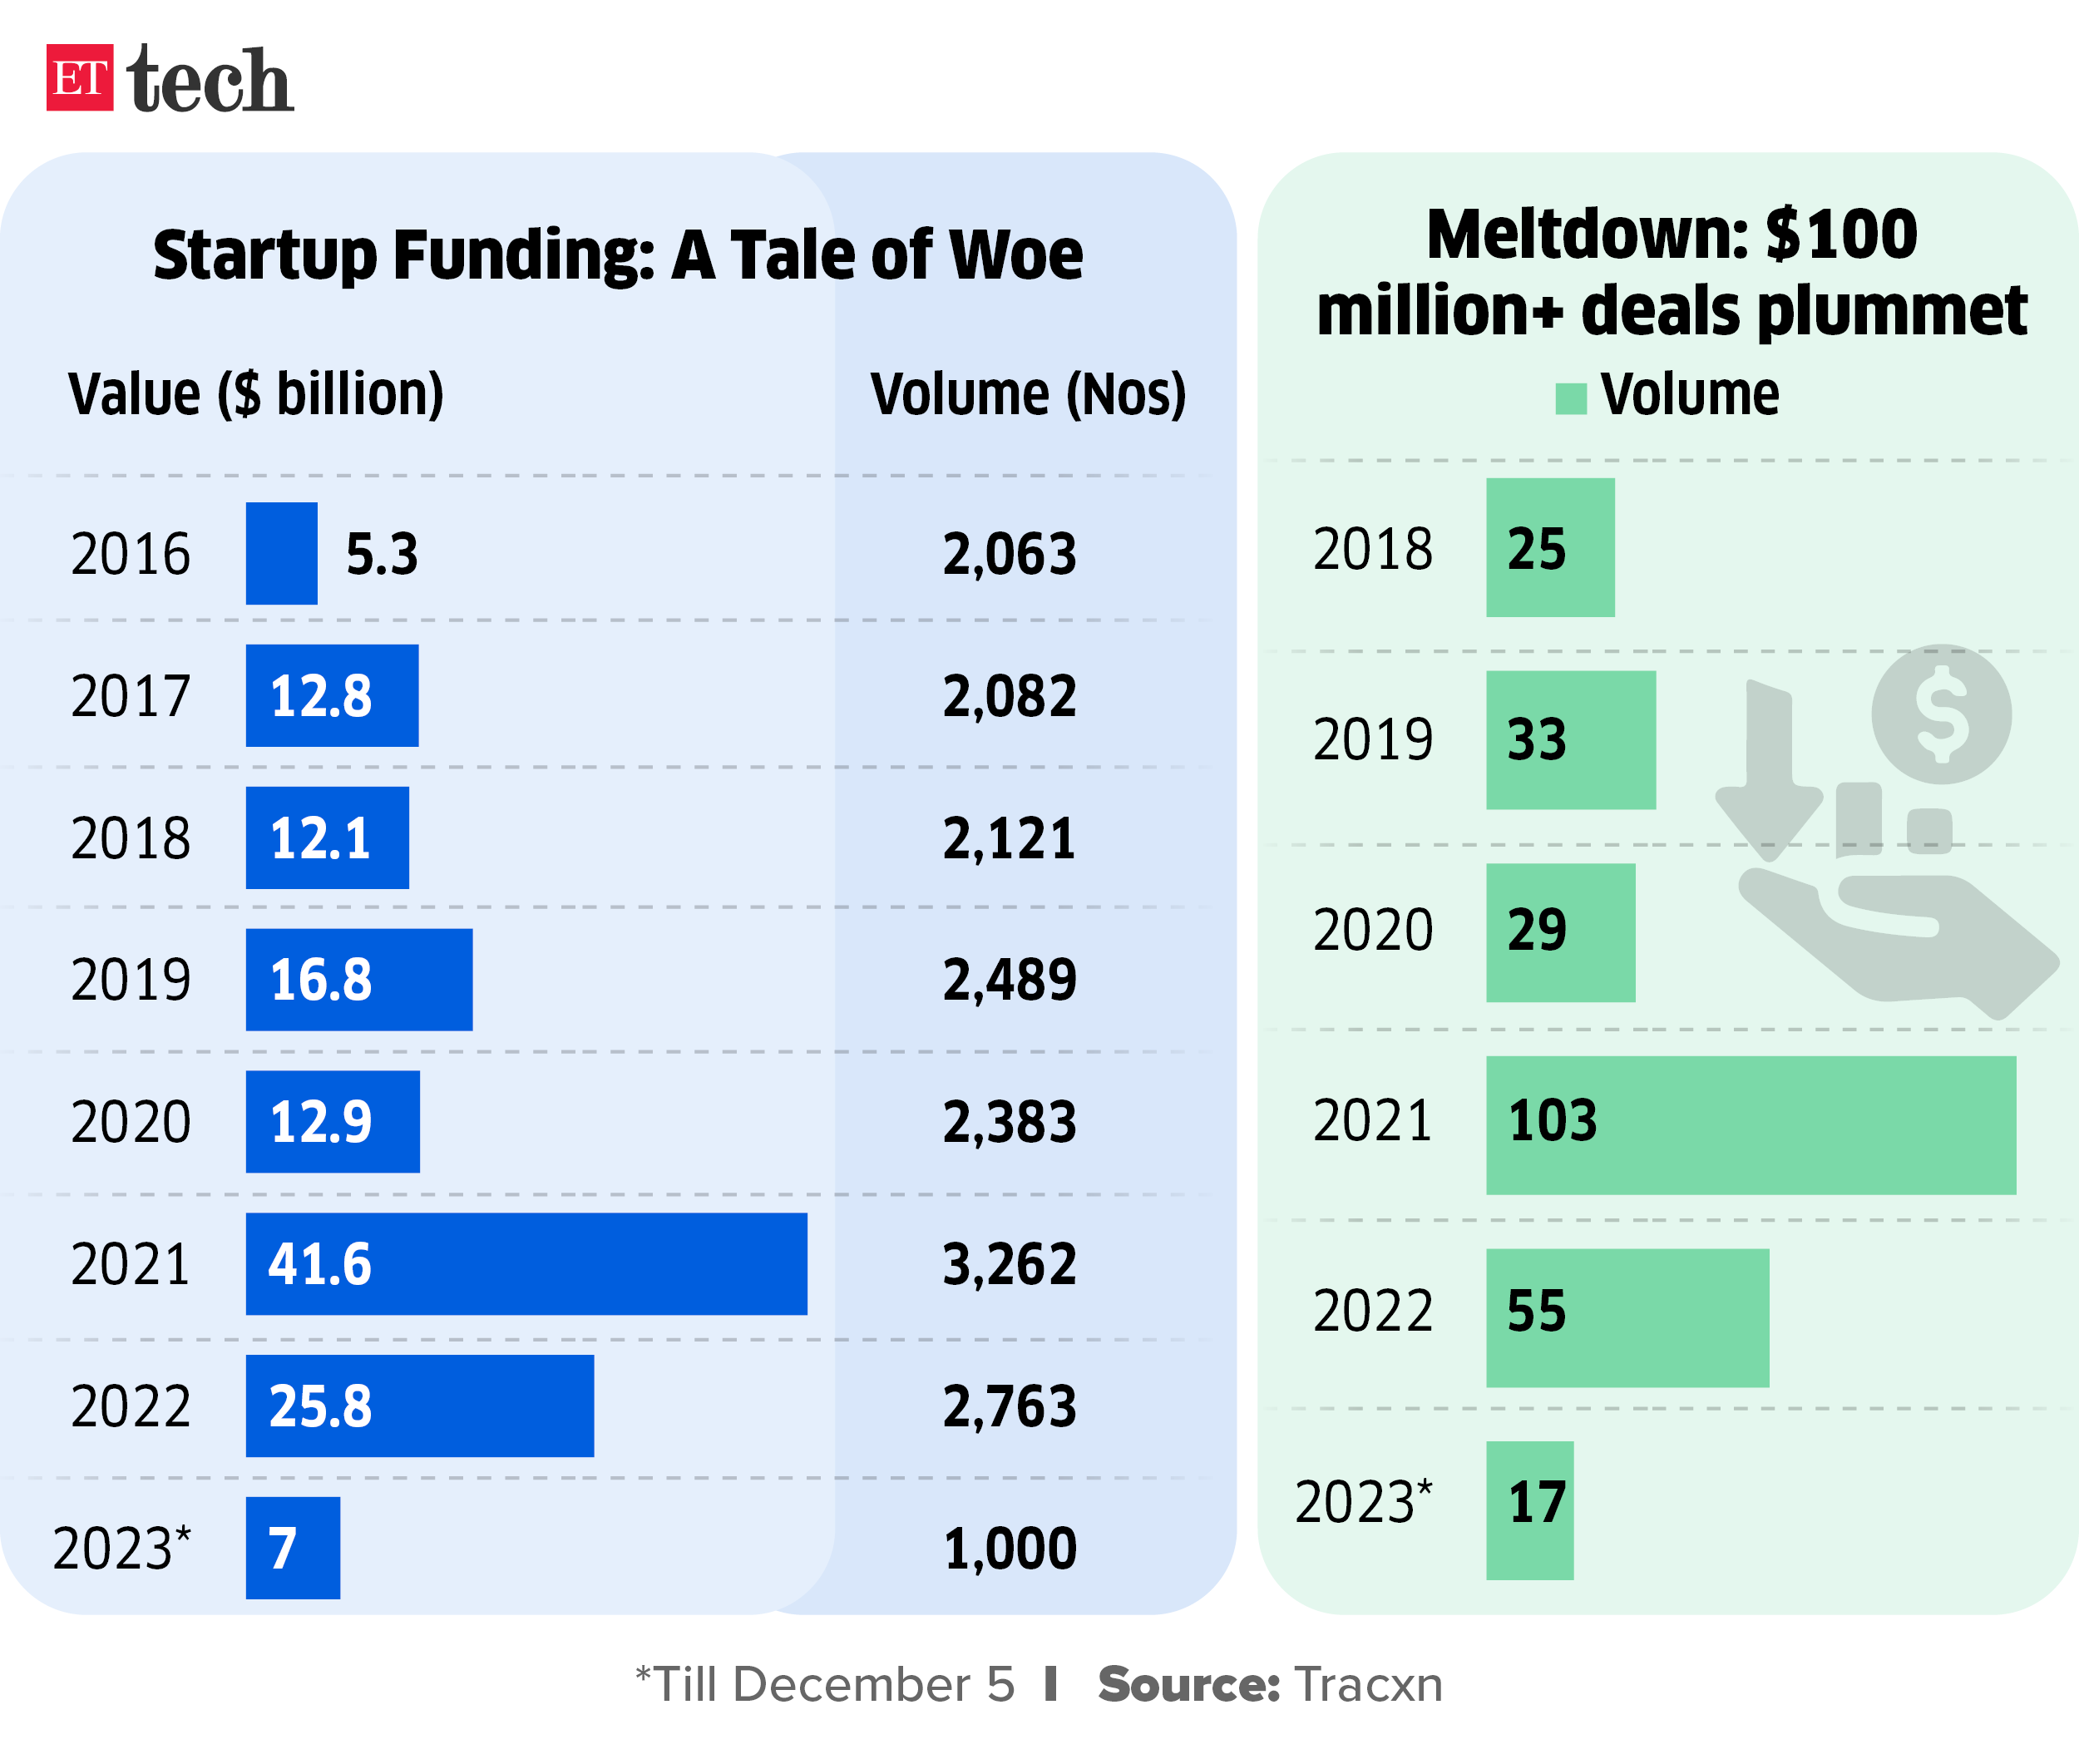 Startup Funding A Tale of Woe graphic ettech